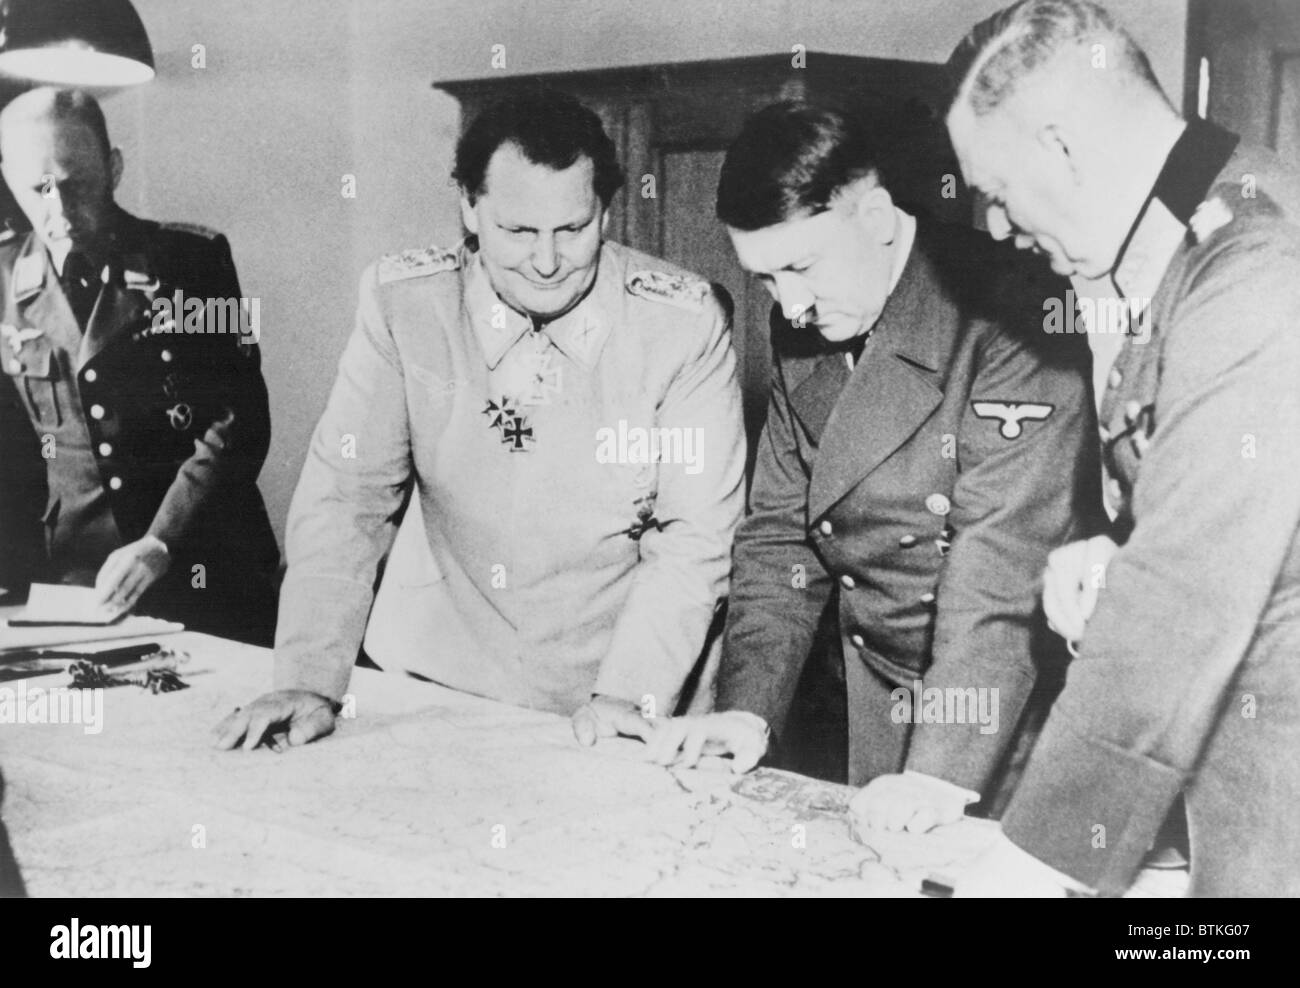 Adolf Hitler, Hermann Goring, and Field Marshall Keitel looking at map on table in 1942, when most Nazi armies were fighting against Russia on the Eastern front. Stock Photo